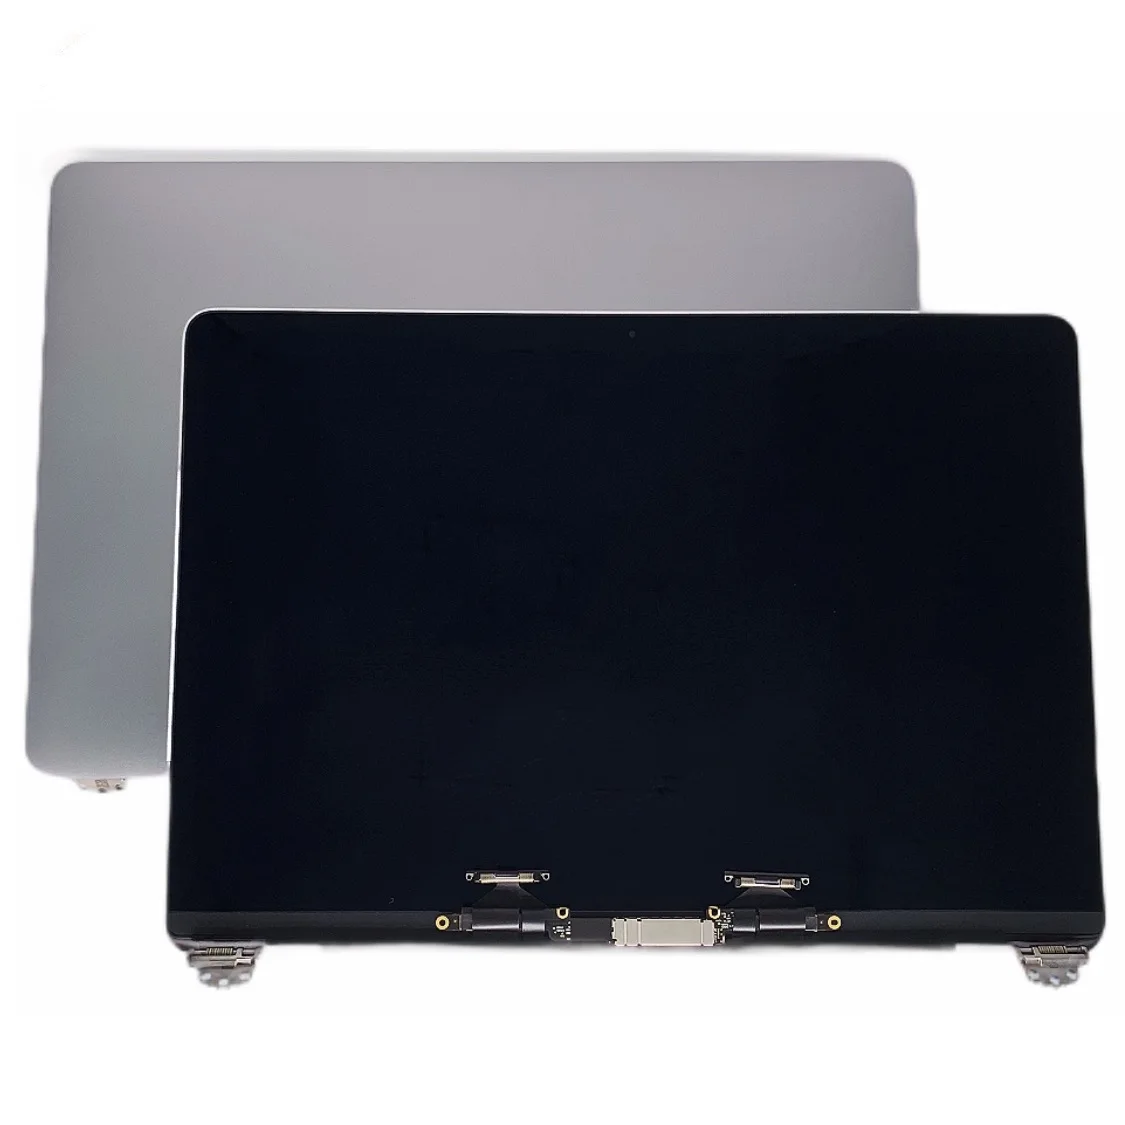 

New For Macbook Retina 13" A1706 A1708 Full LCD 2016 2017 Year Laptop Silver Space Gray A1706 A1708 LCD Screen Display